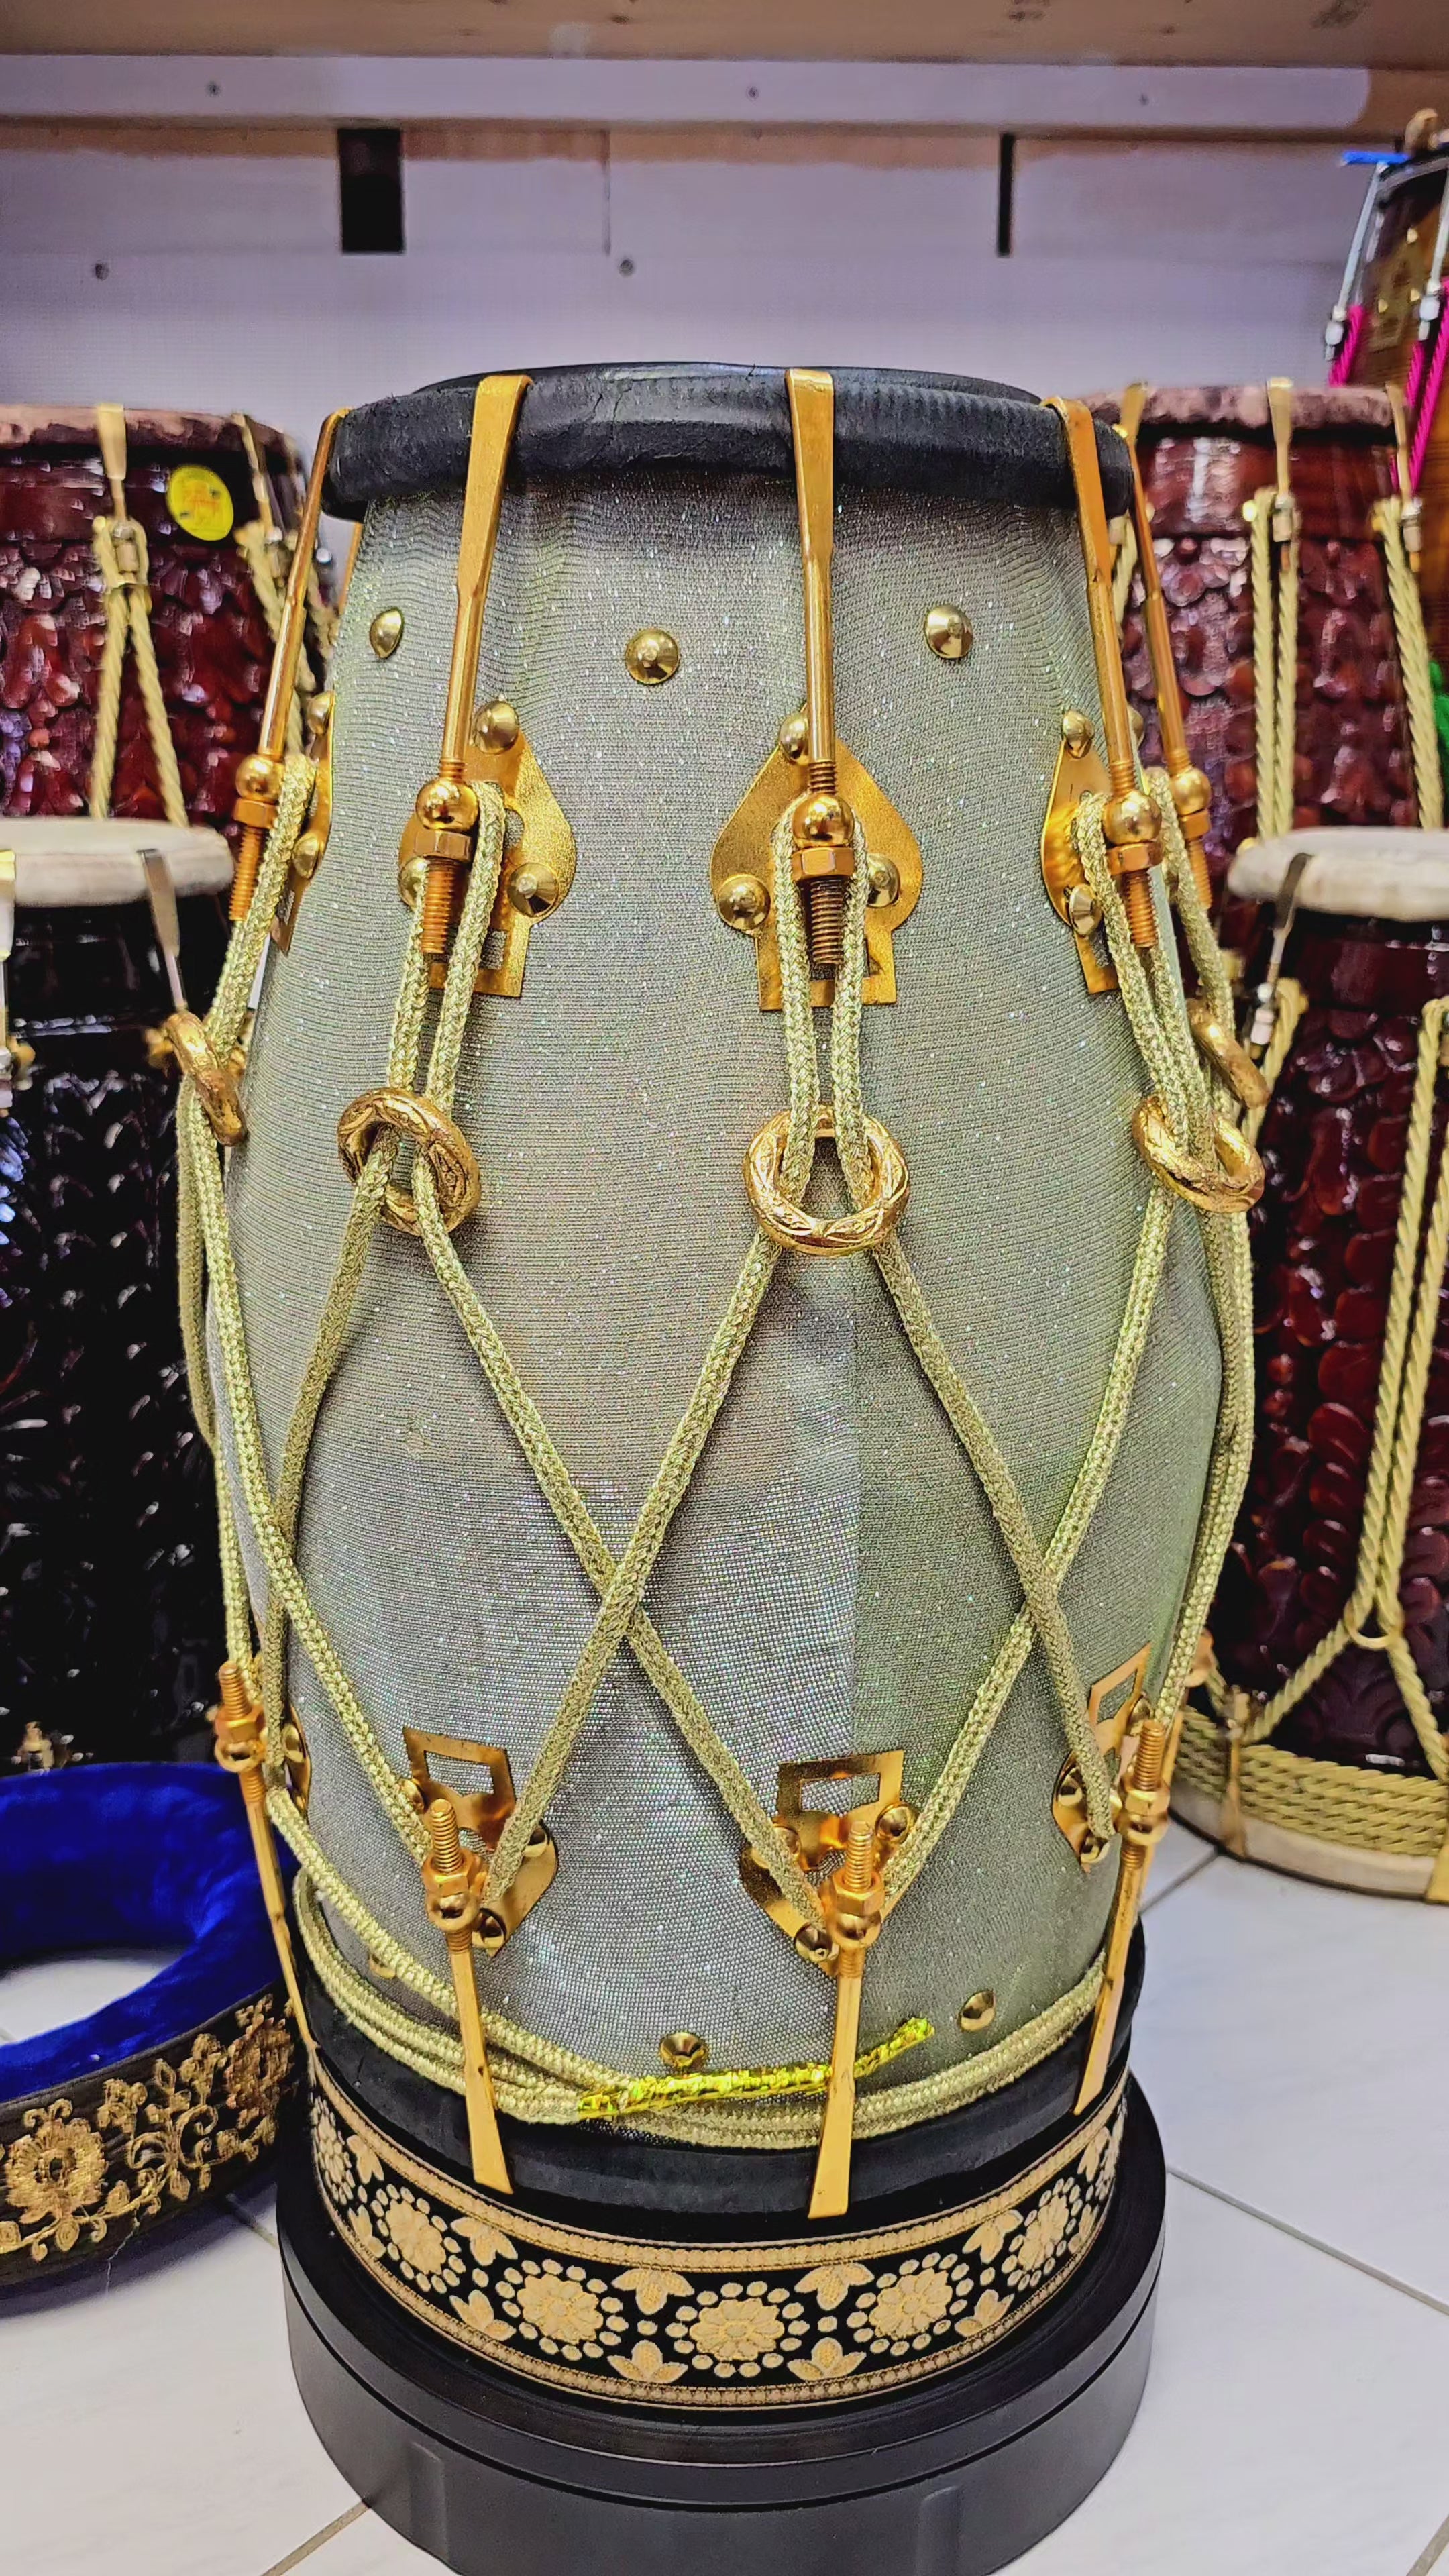 Radiant Rhythms: Sparkly Sherwani Wrapped Red Sheesham Dholak with Golden Brass Bolts and Black Pudis (Minor Fabric Rip Defects) (BLACK FRIDAY SALE!)